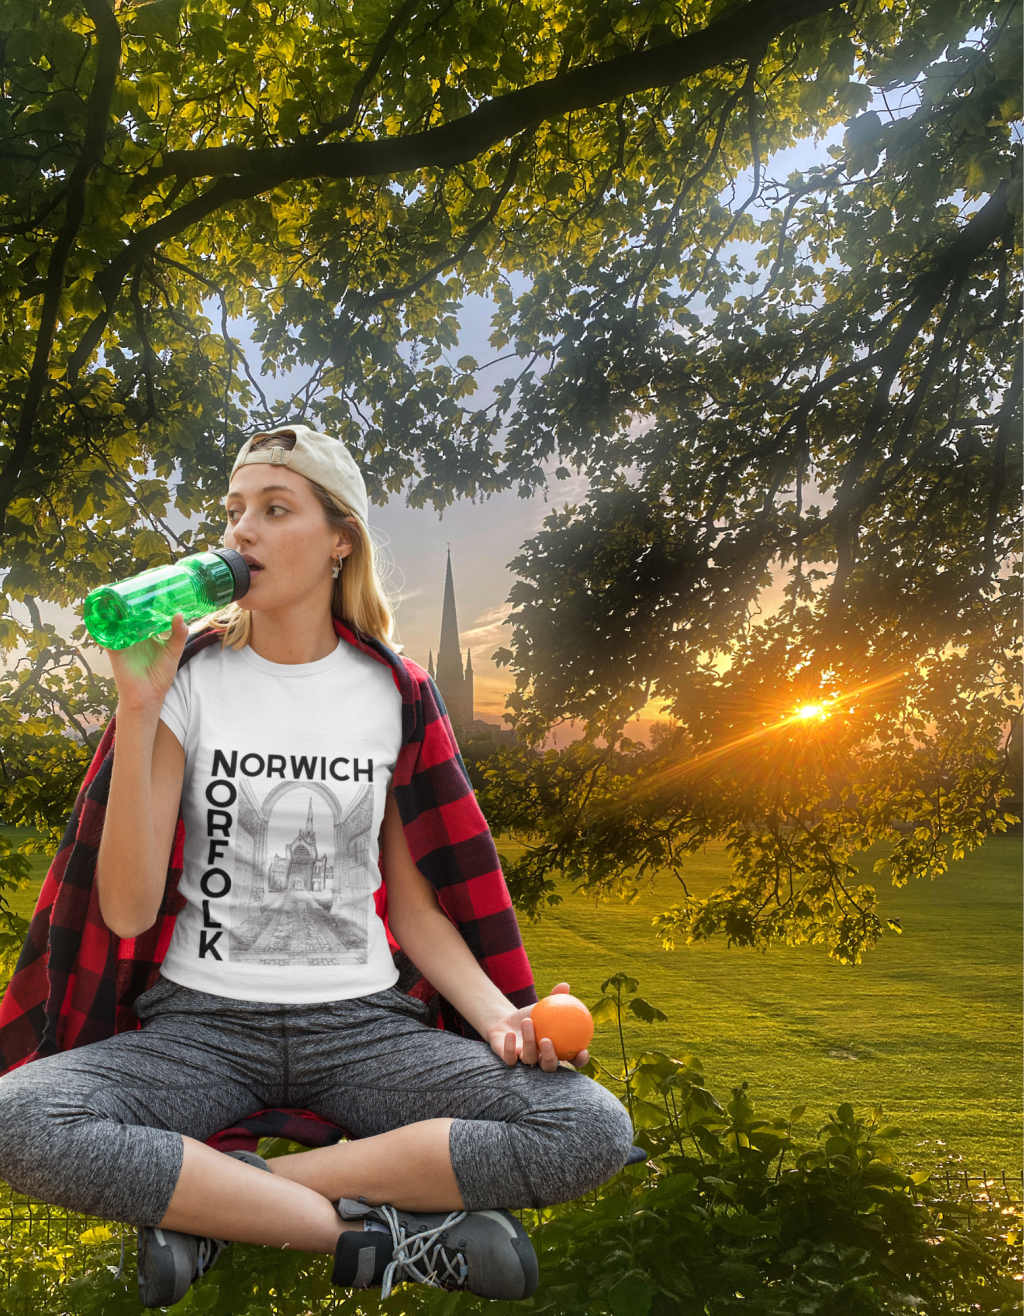 Celebrate Norwich & Norfolk with these fabulous new designs!